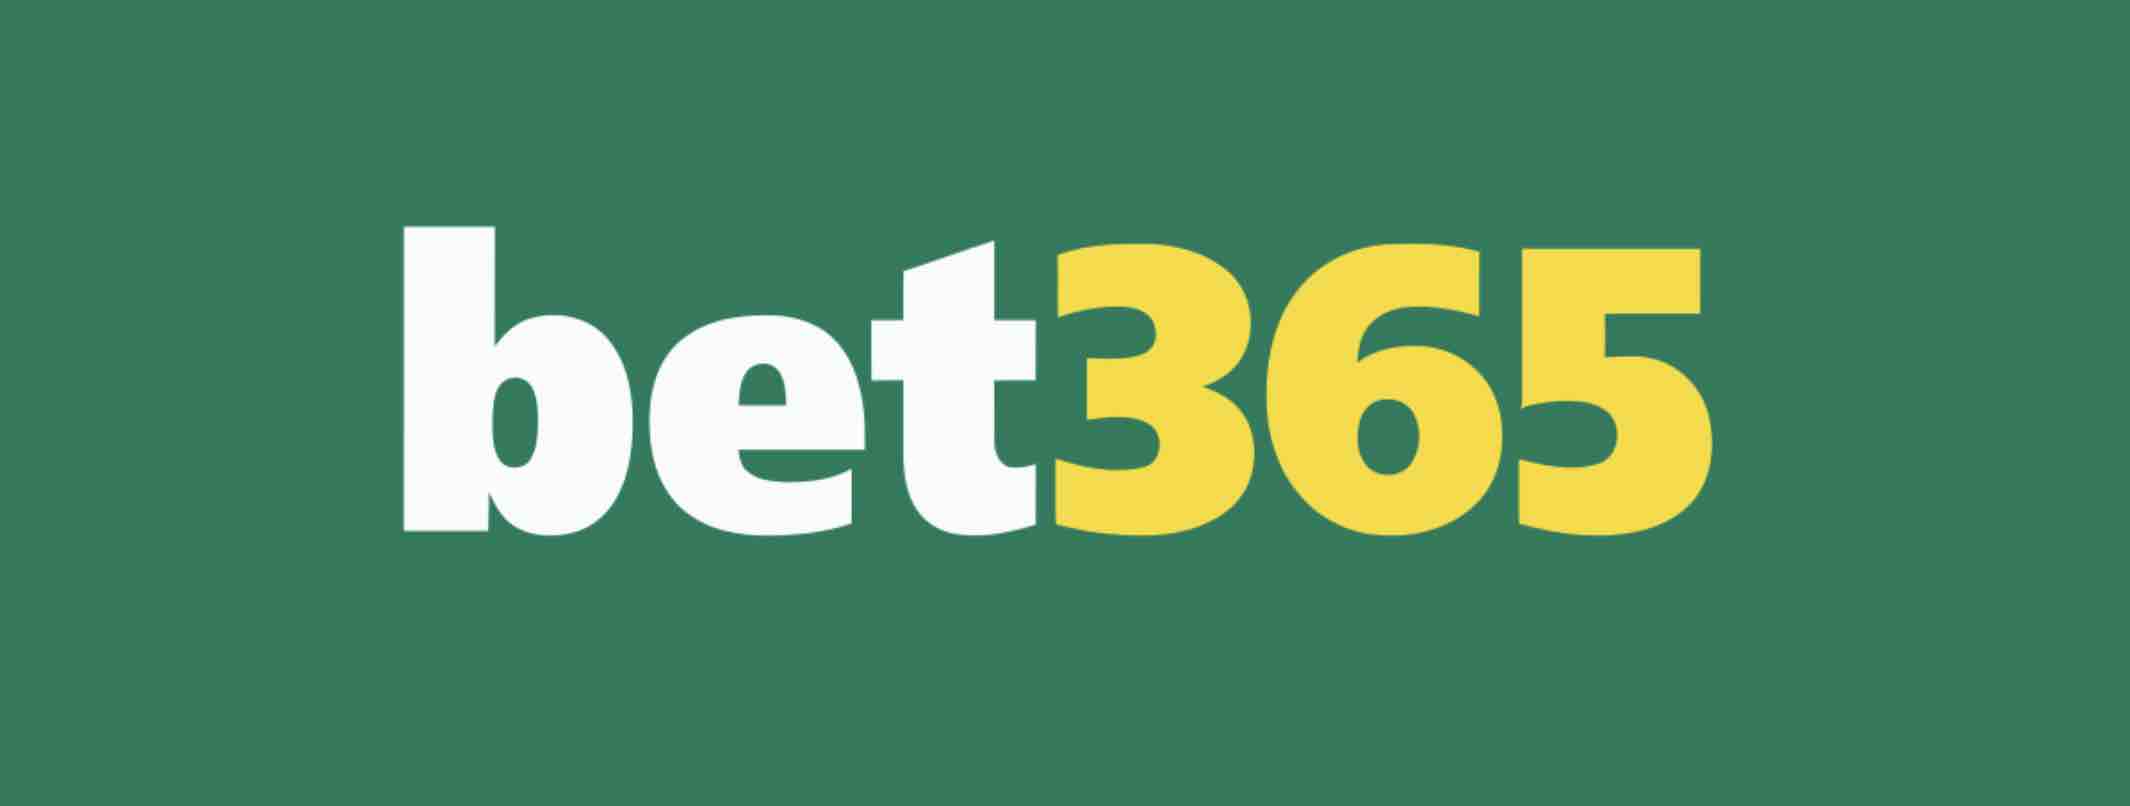 bet365 casino android app download